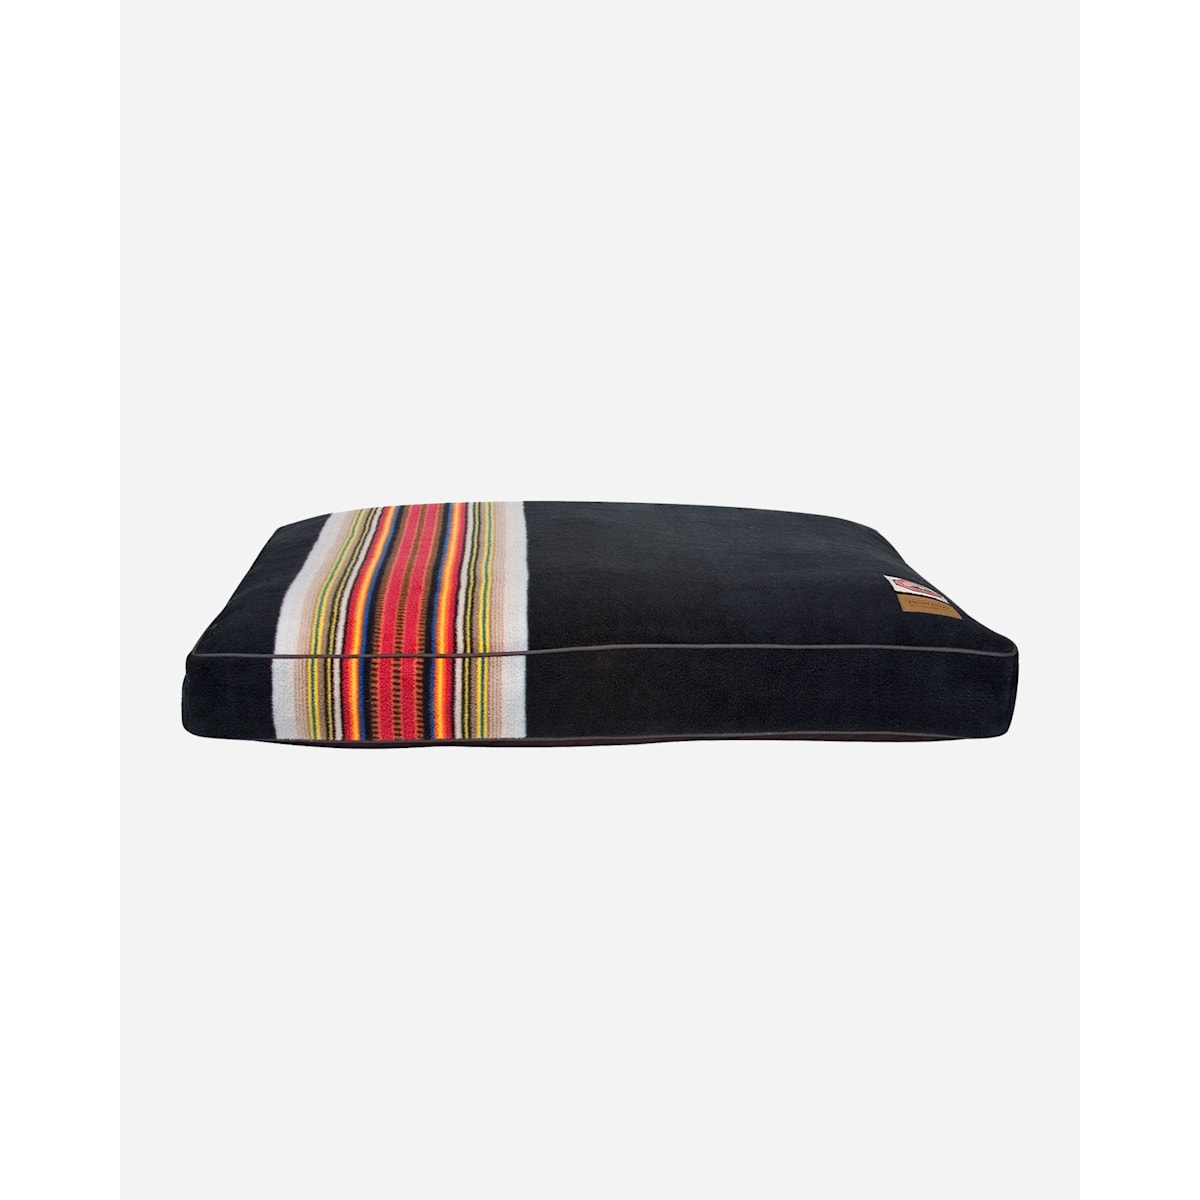 Penedleton Napper Acadia Black with Stripe - Southern Agriculture